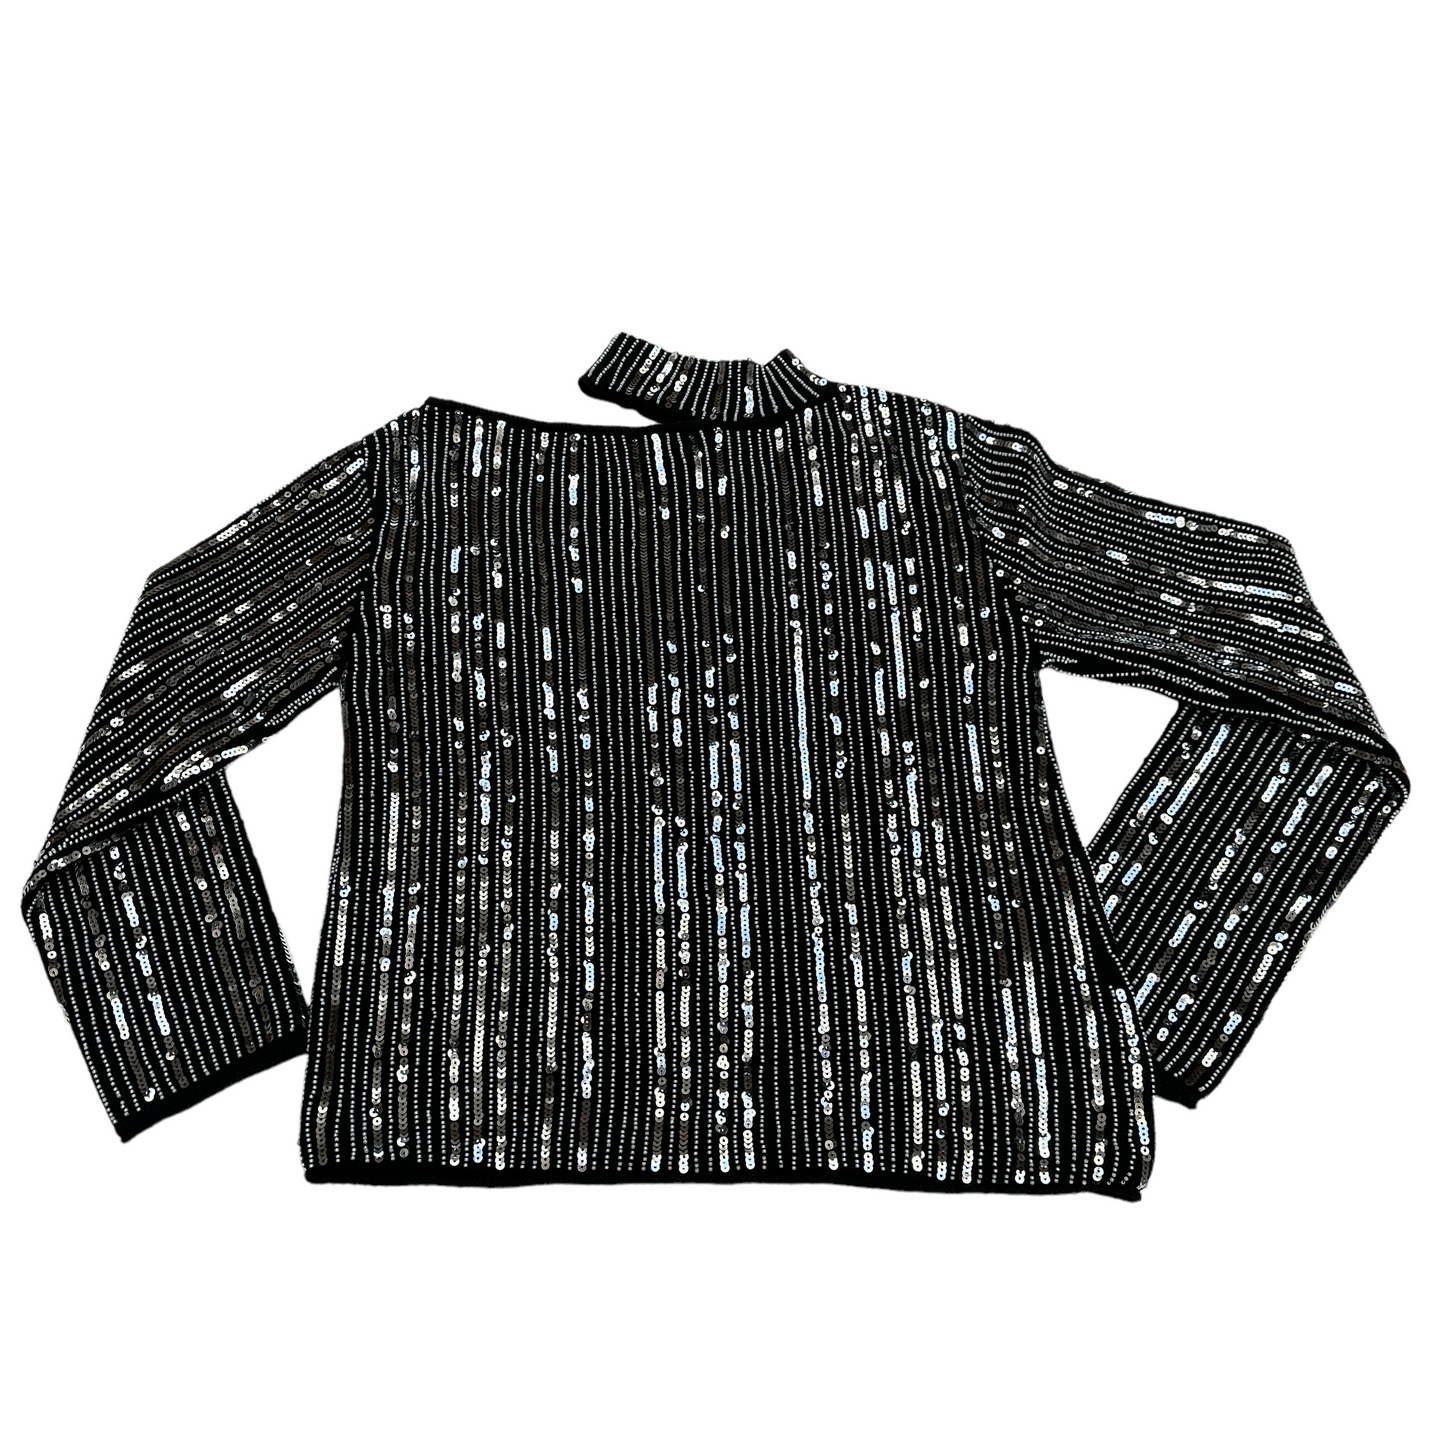 Sequins Cut Out Sweater - S